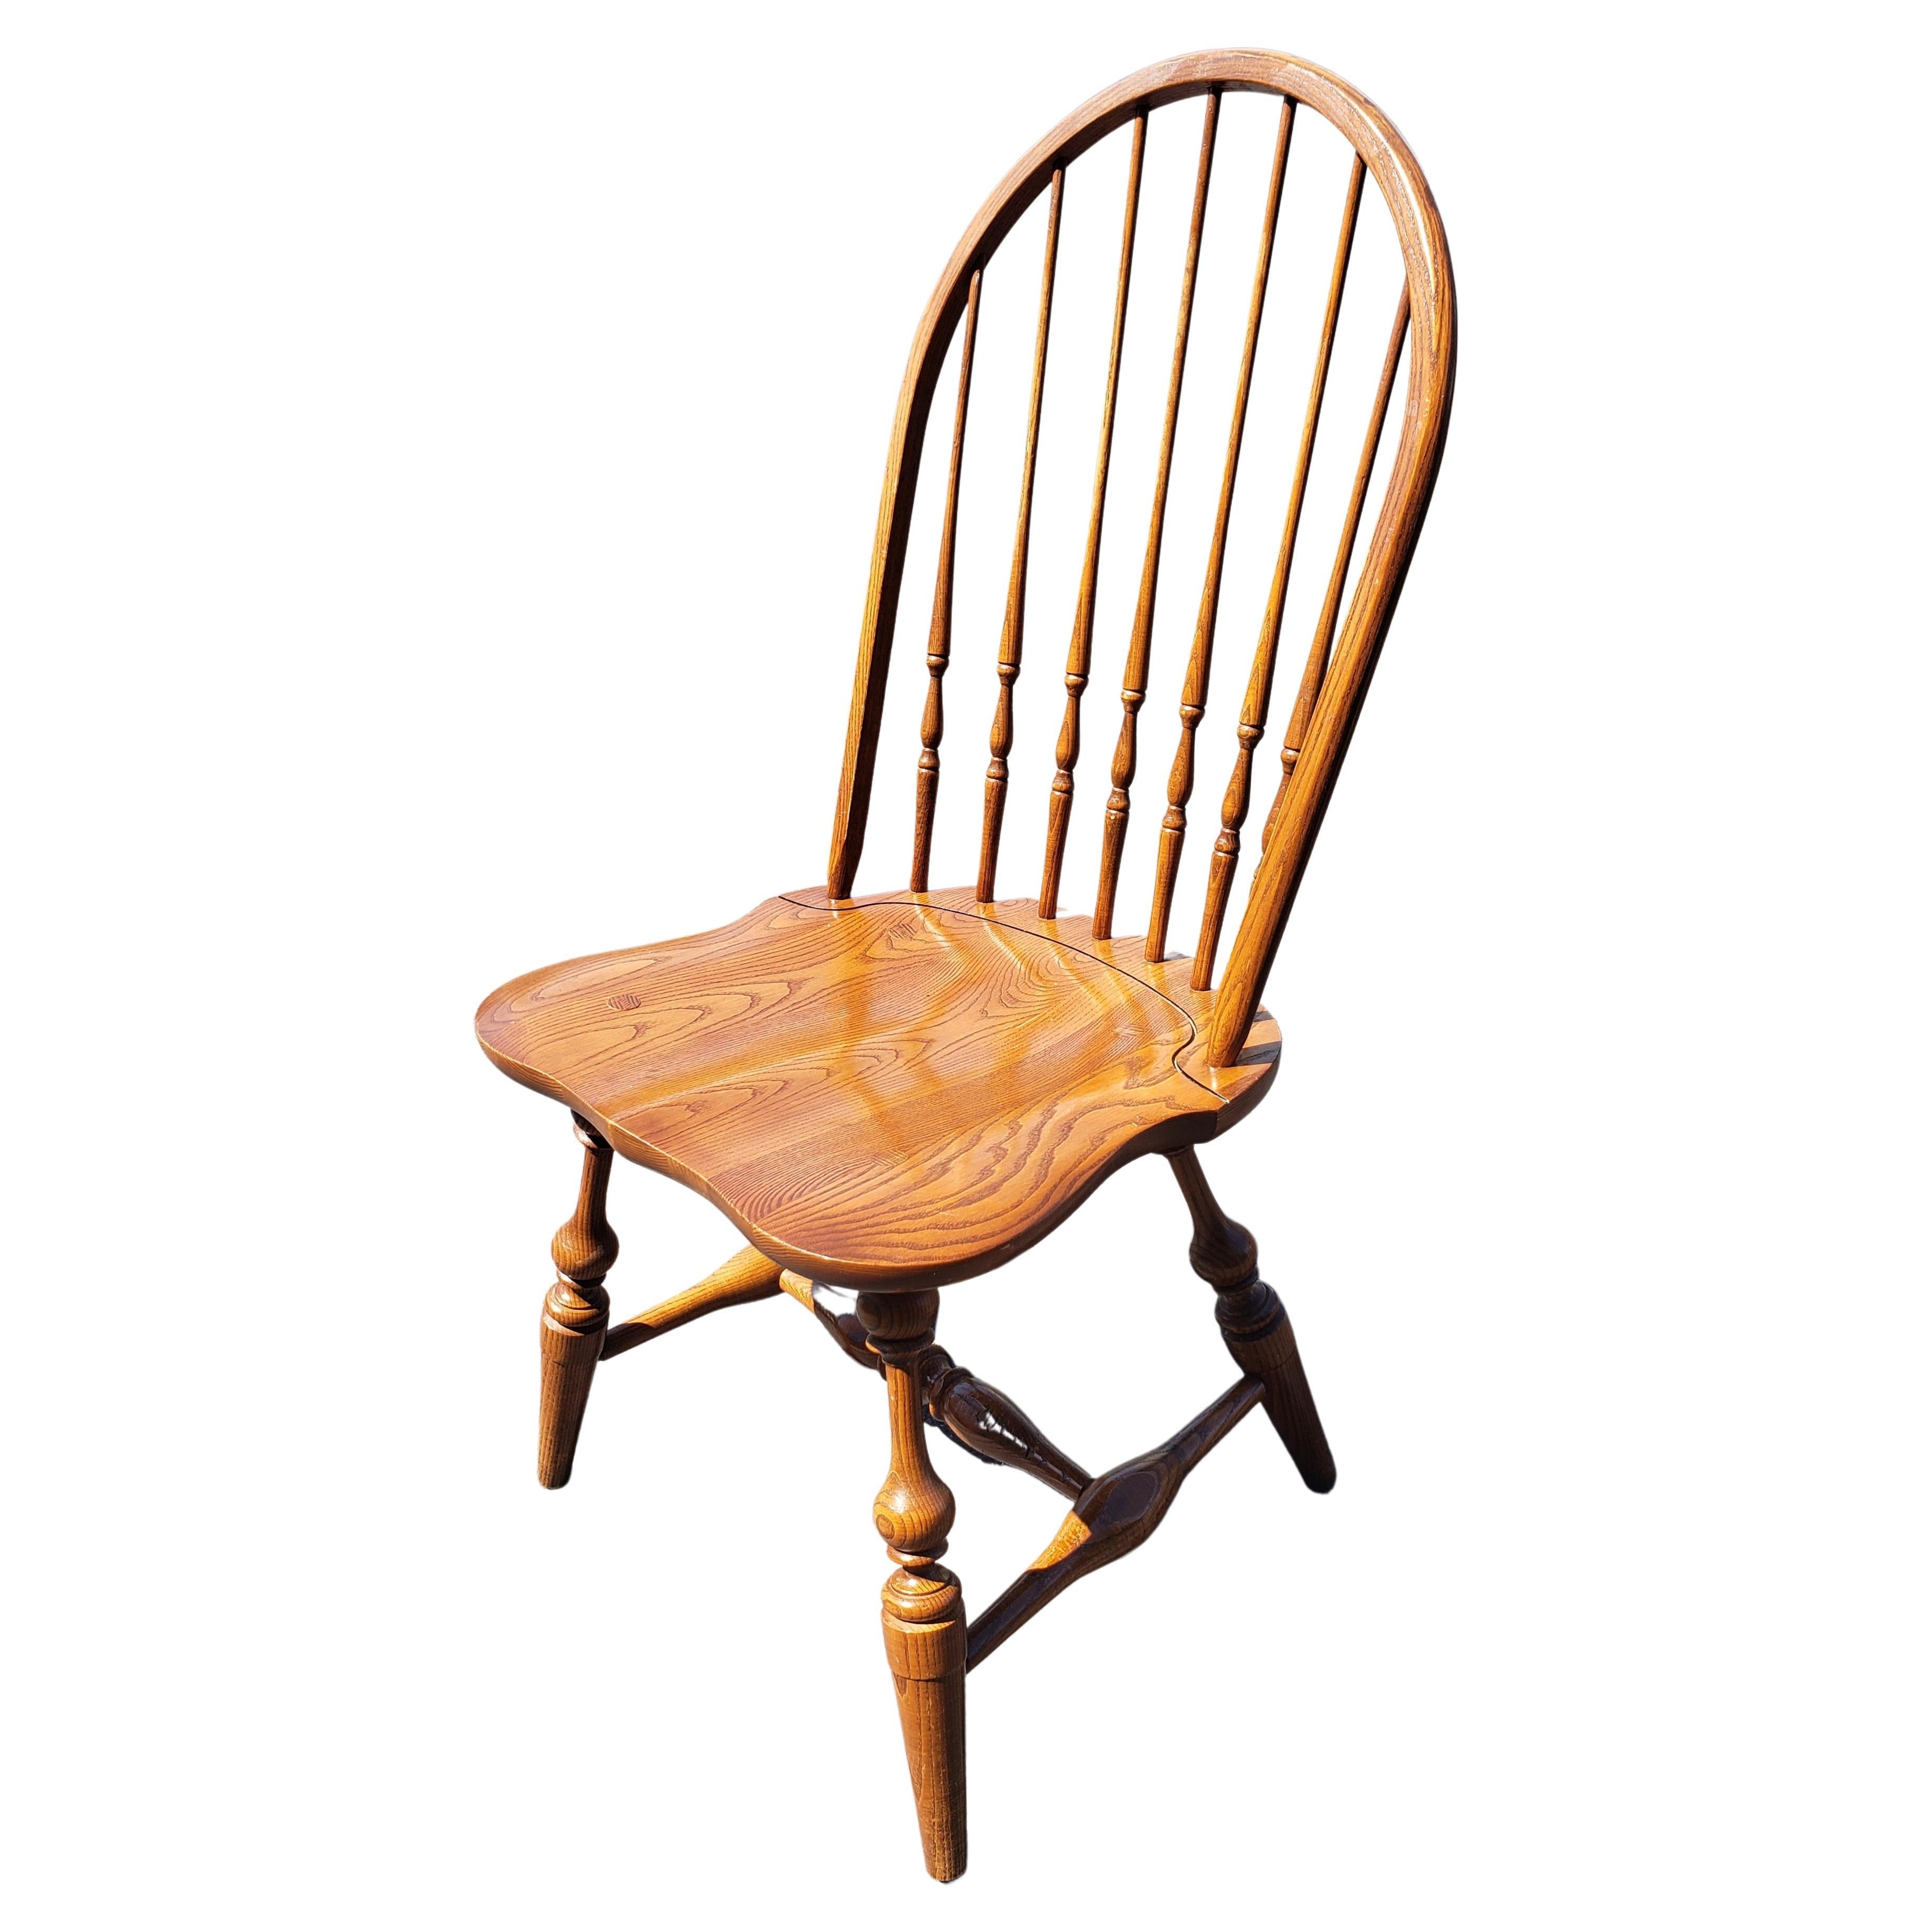 American Classical Lambert Hitchcock Quarter Sawn Oak Mission Saddle Seat Dining Chairs, a Set